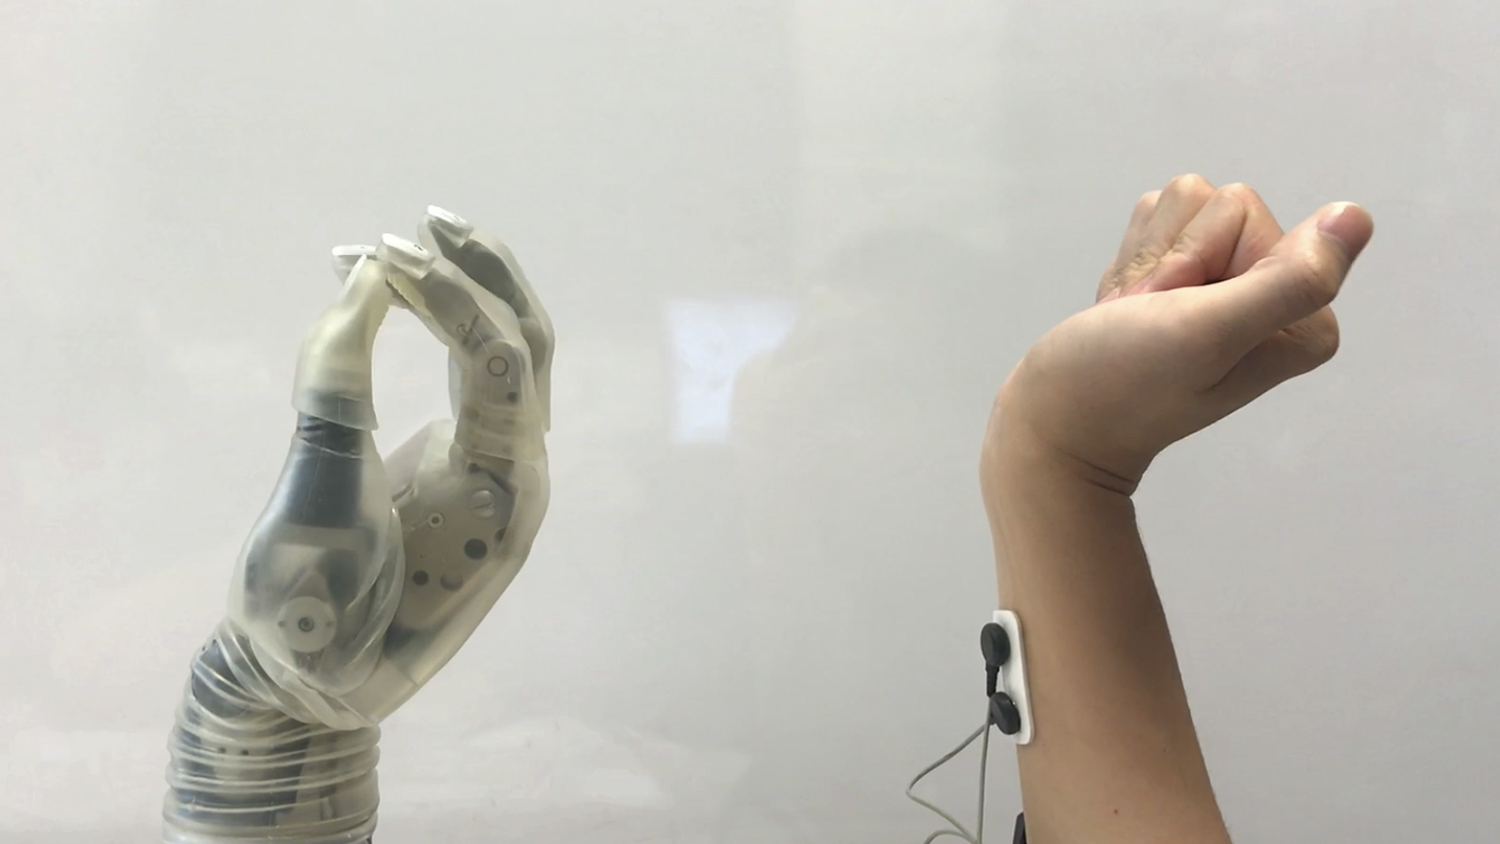 New Tech May Make Prosthetic Hands Easier for Patients to Use